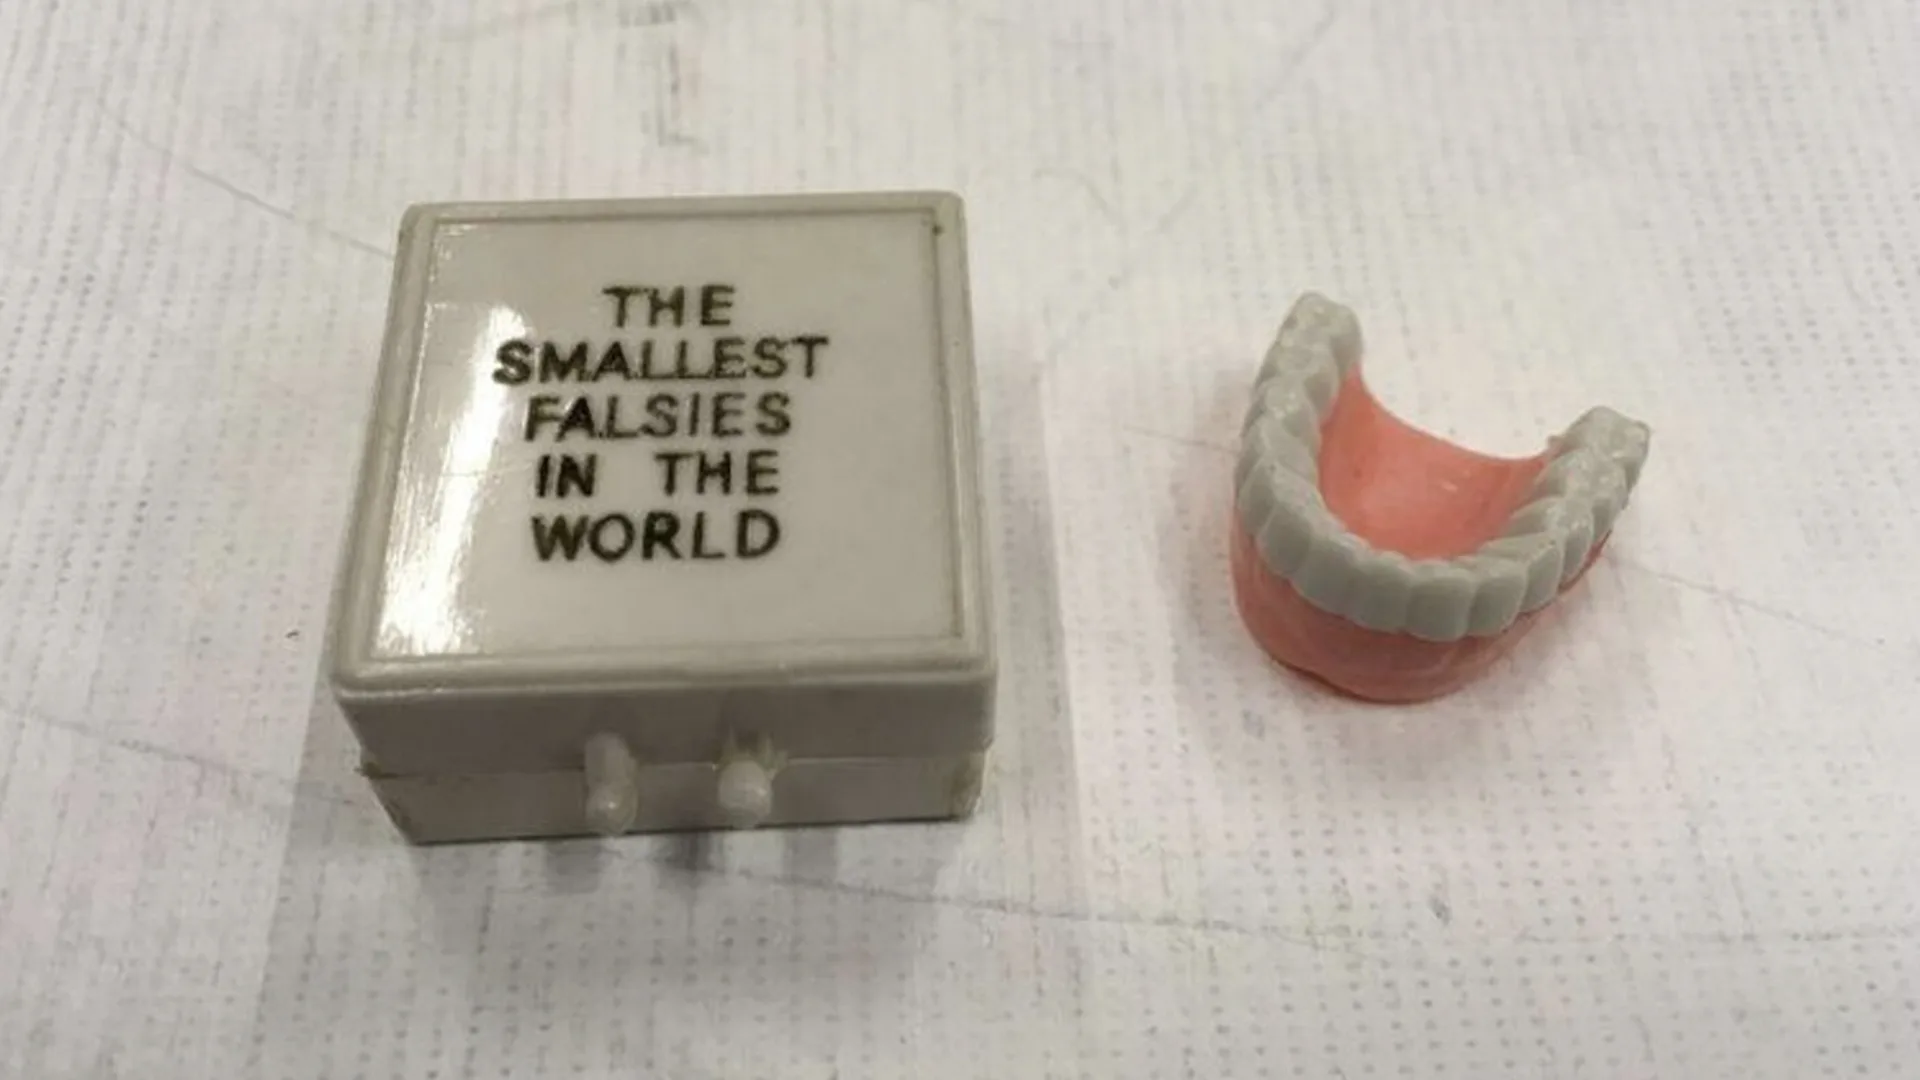 Fake teeth next to a white box which say 'The smallest falsies in the world' in capital letters